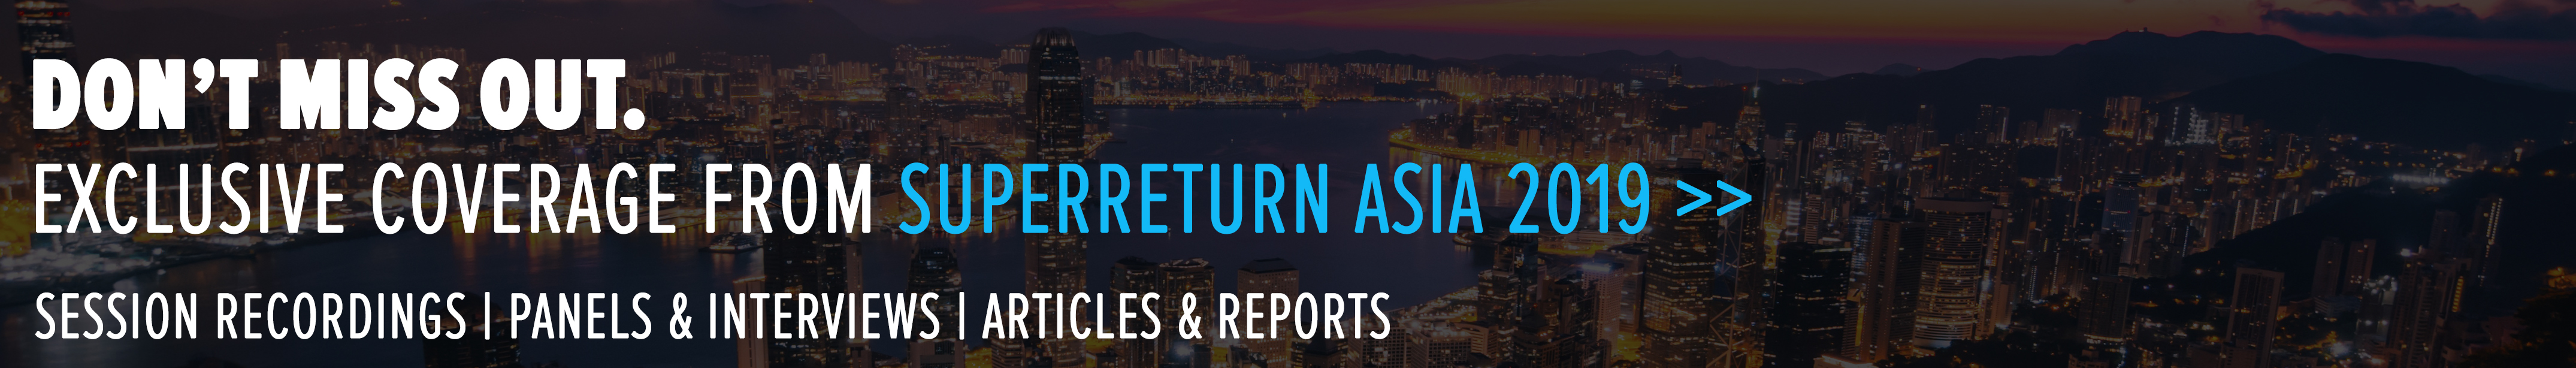 catch up on the content from superreturn asia 2019